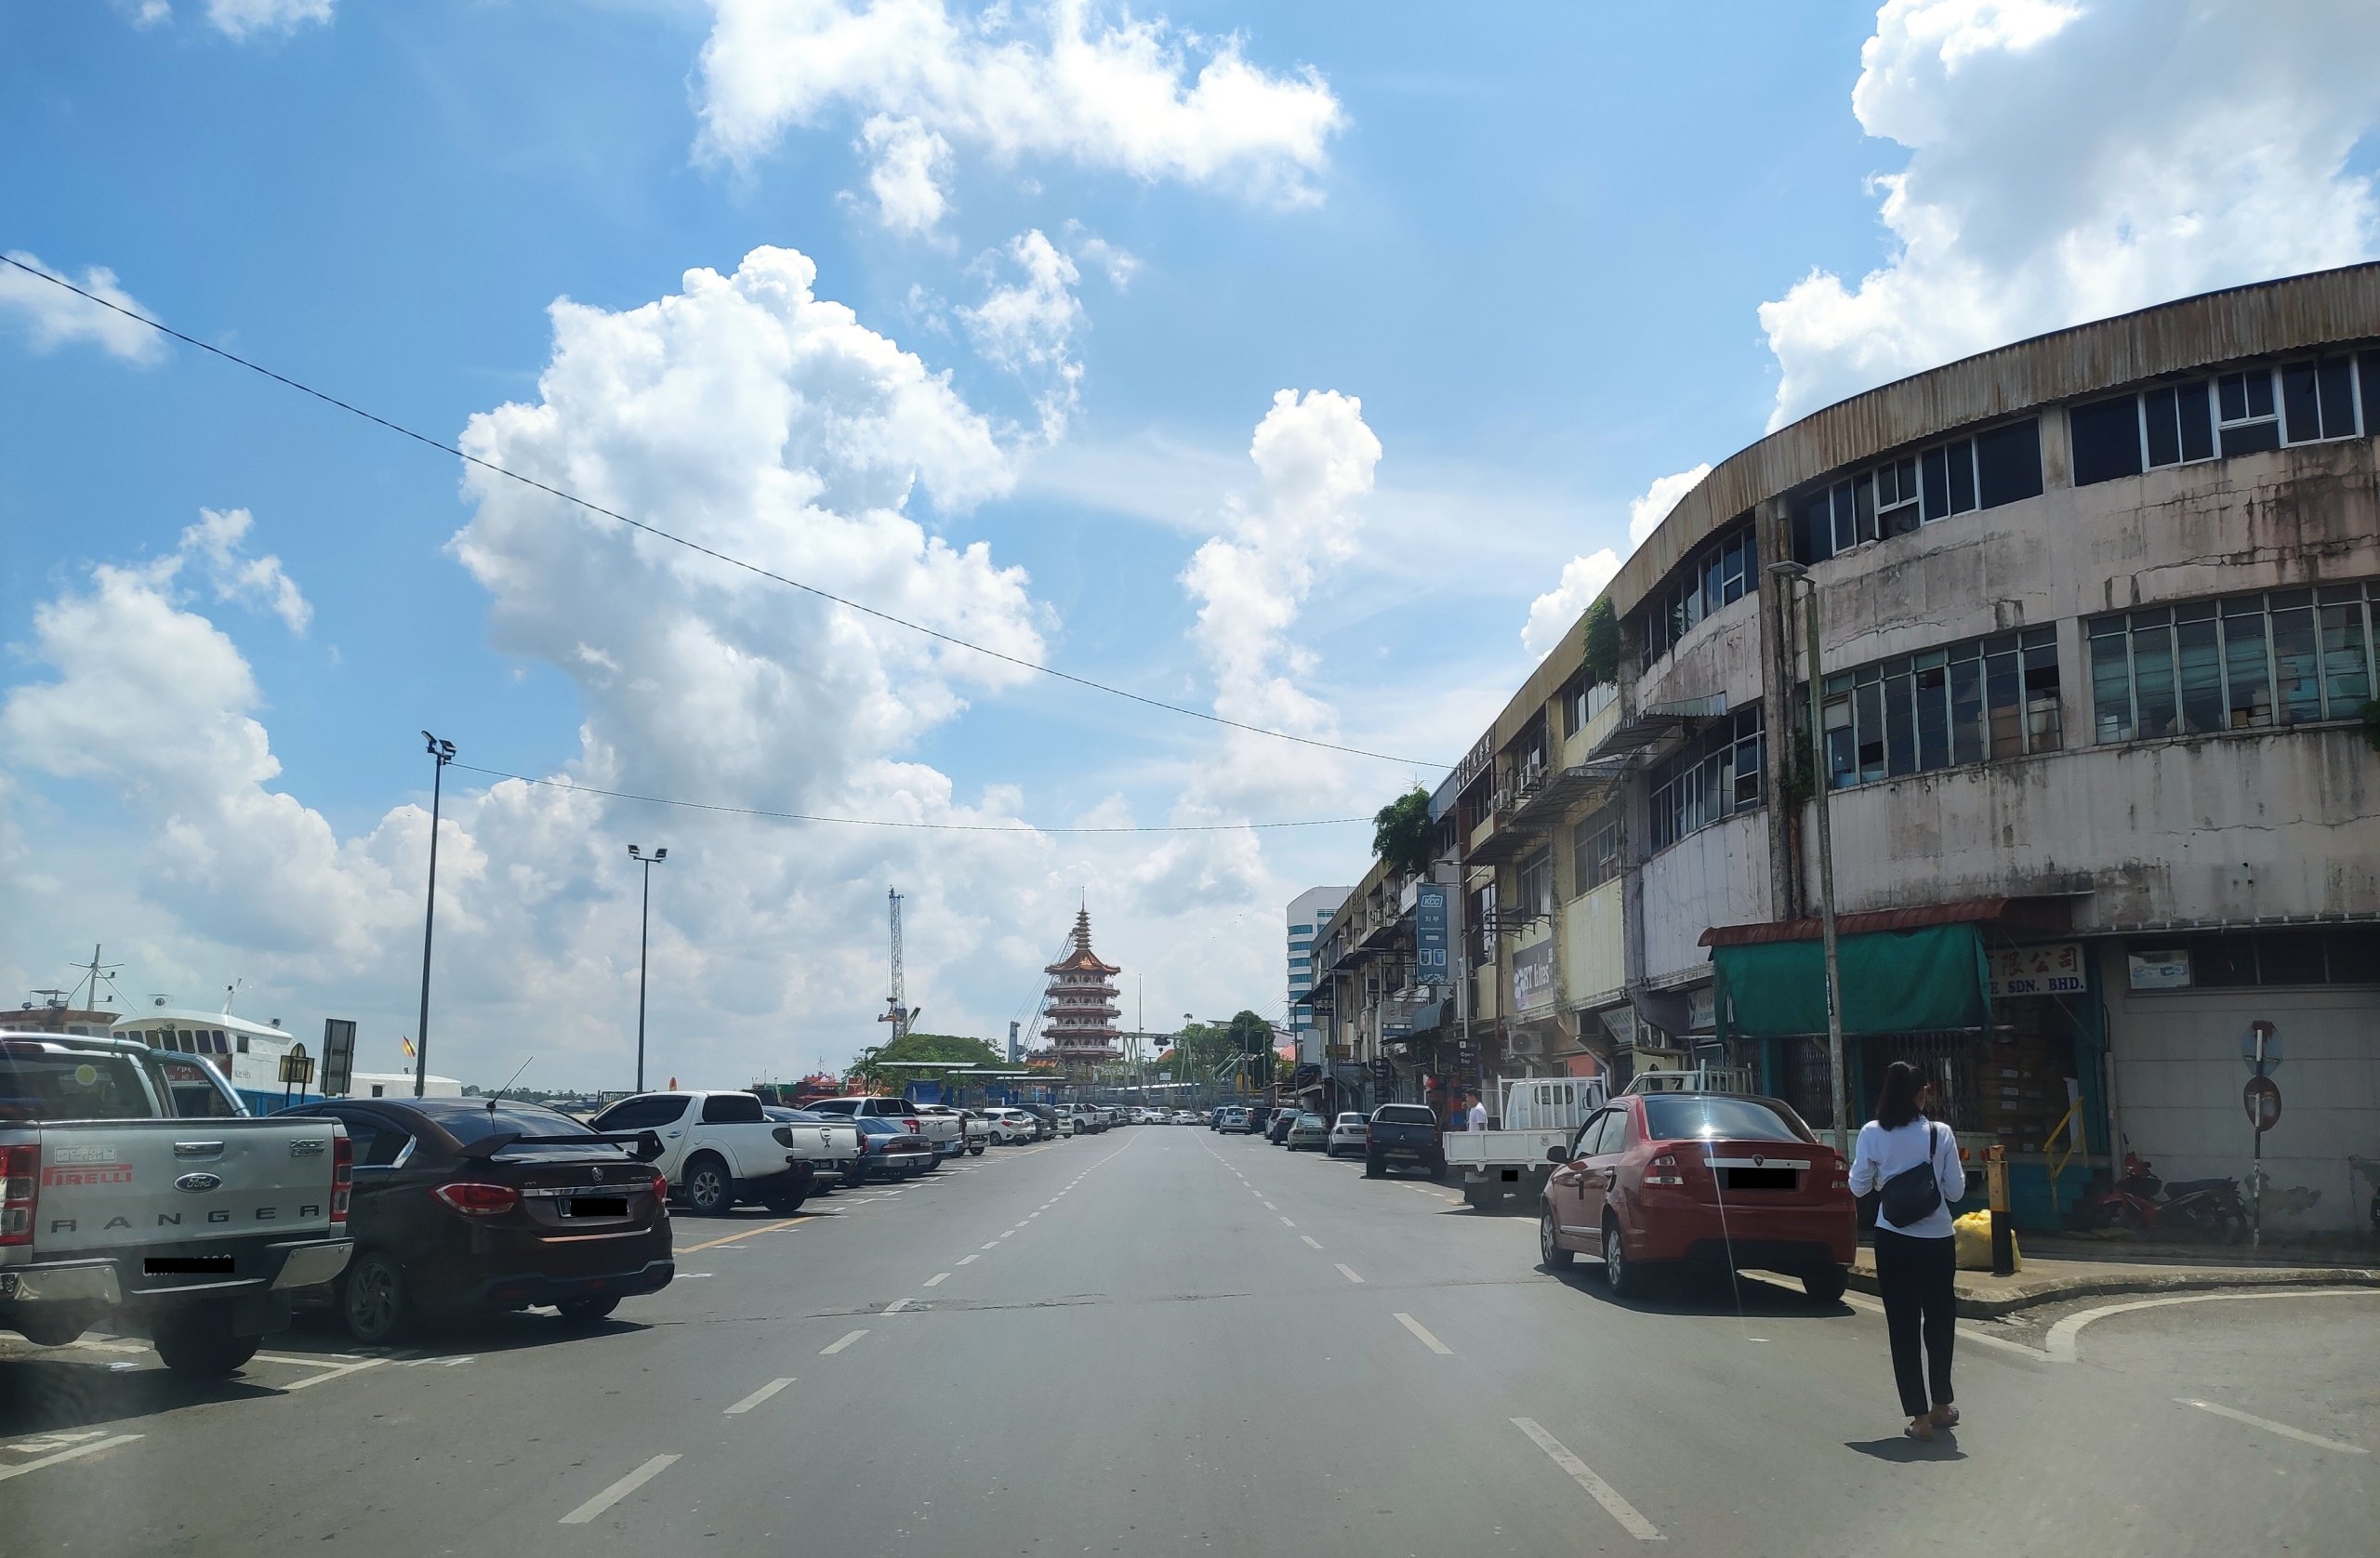 The photo taken on May 27, showing the stretch of Jalan Khoo Peng Loong. – Photo by Peter Boon